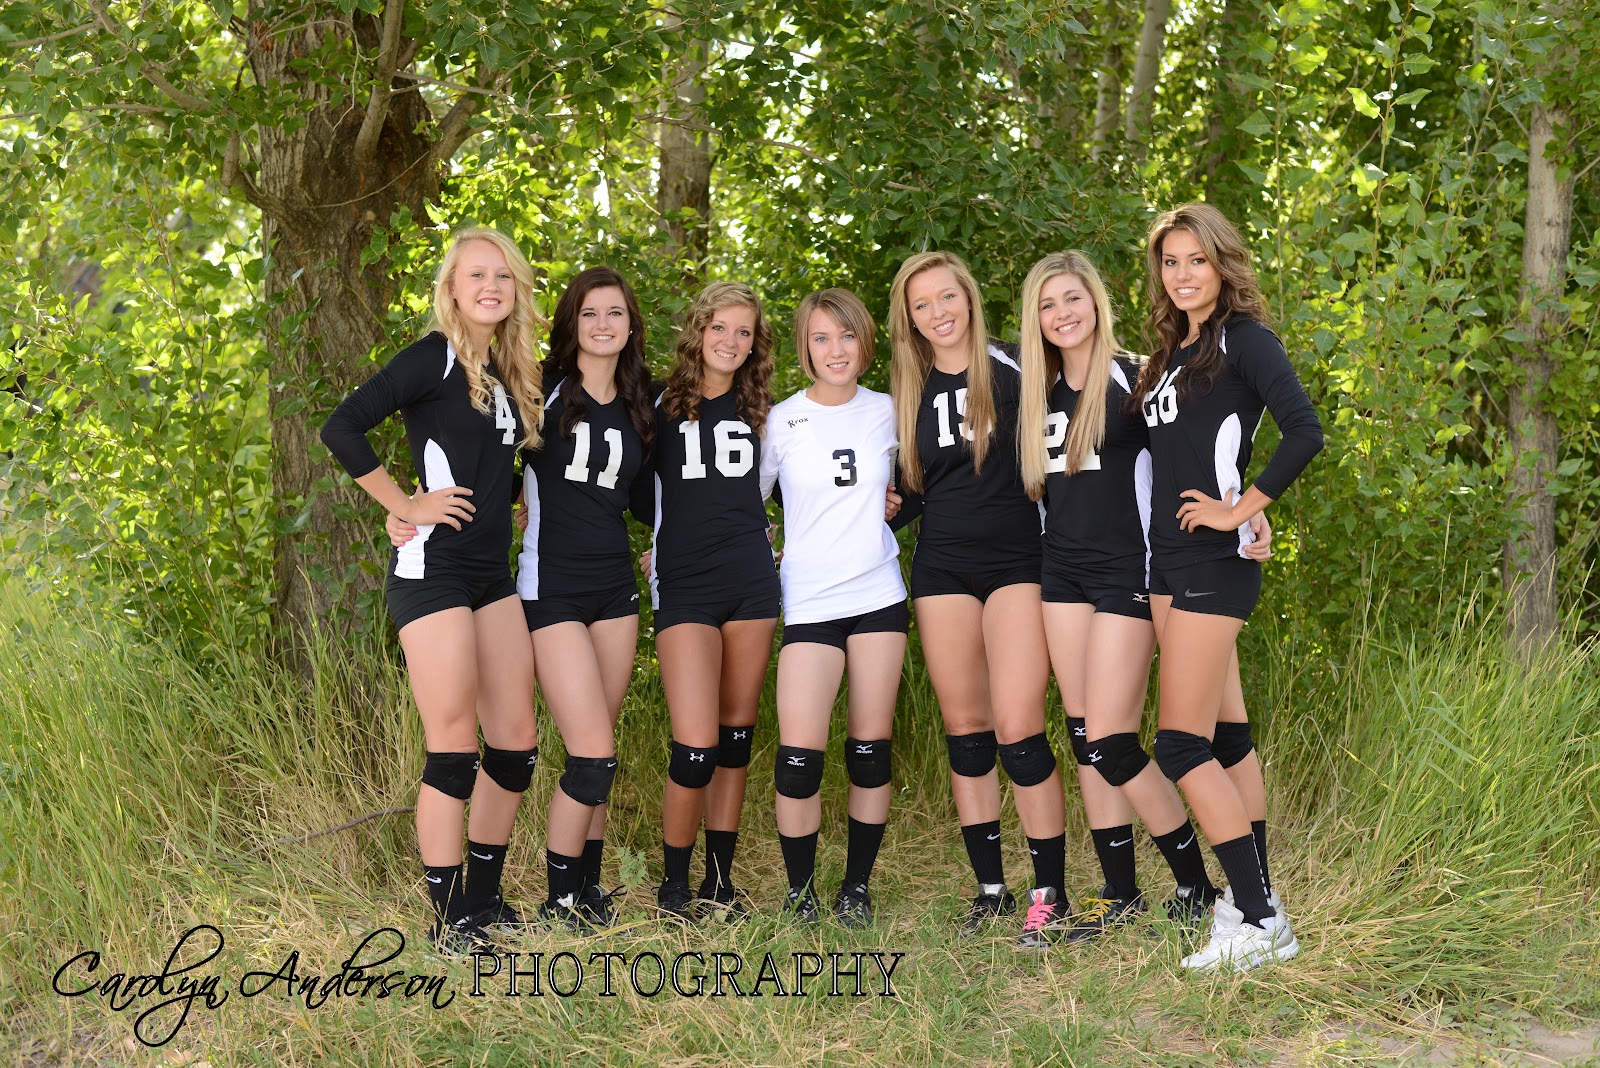 Carolyn Anderson Photography: Snake River Volleyball Team.